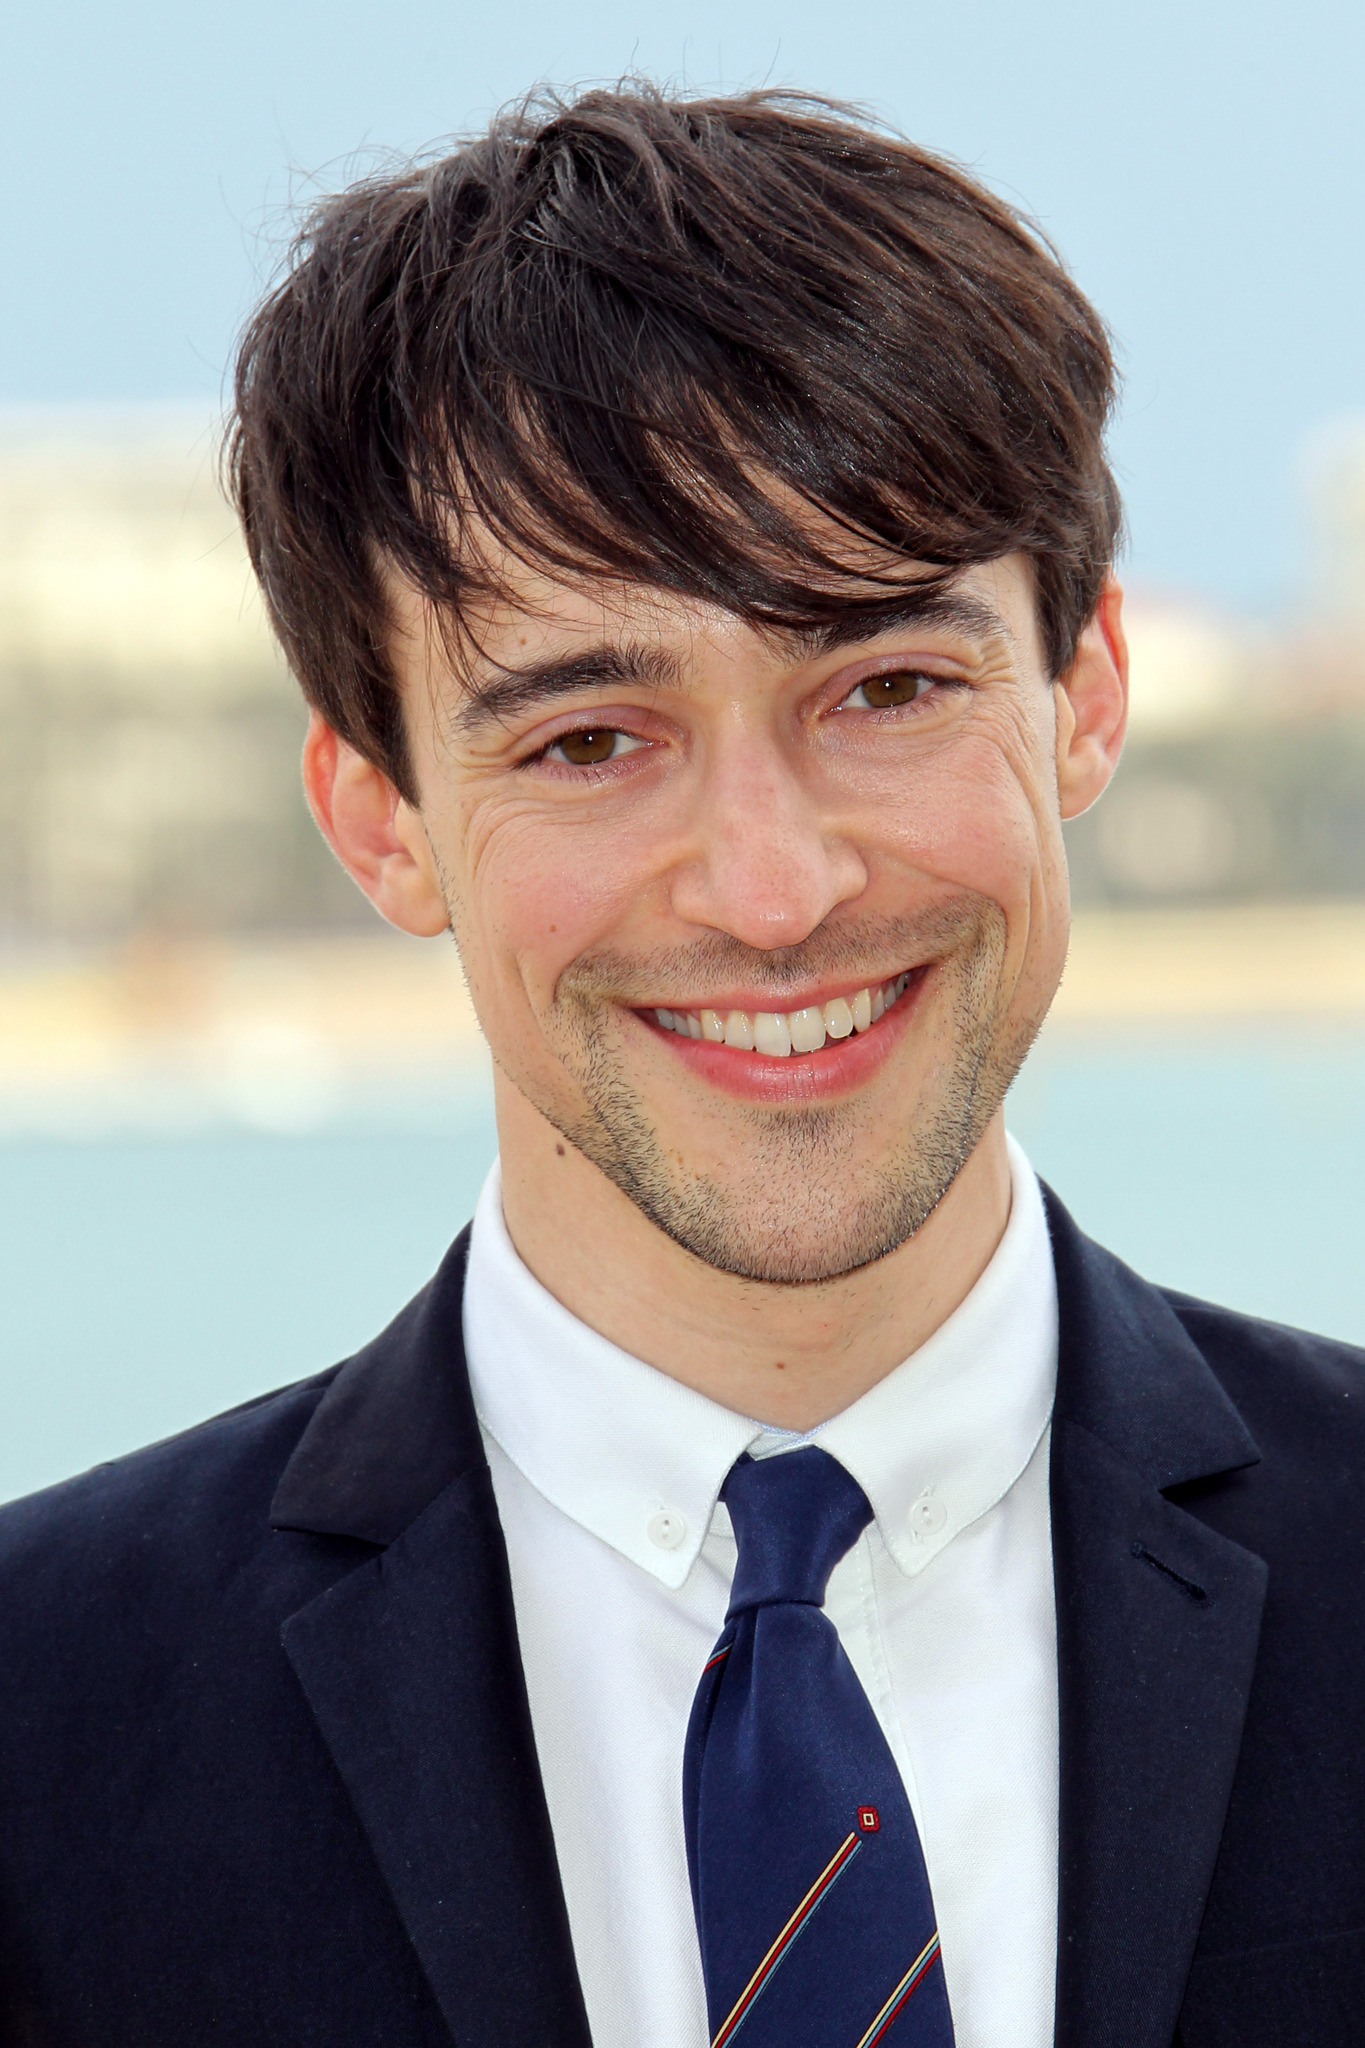 Blake Ritson attends a photocall for the TV serie 'Da Vinci's Demons' at MIP TV 2013 on April 8, 2013 in Cannes, France.